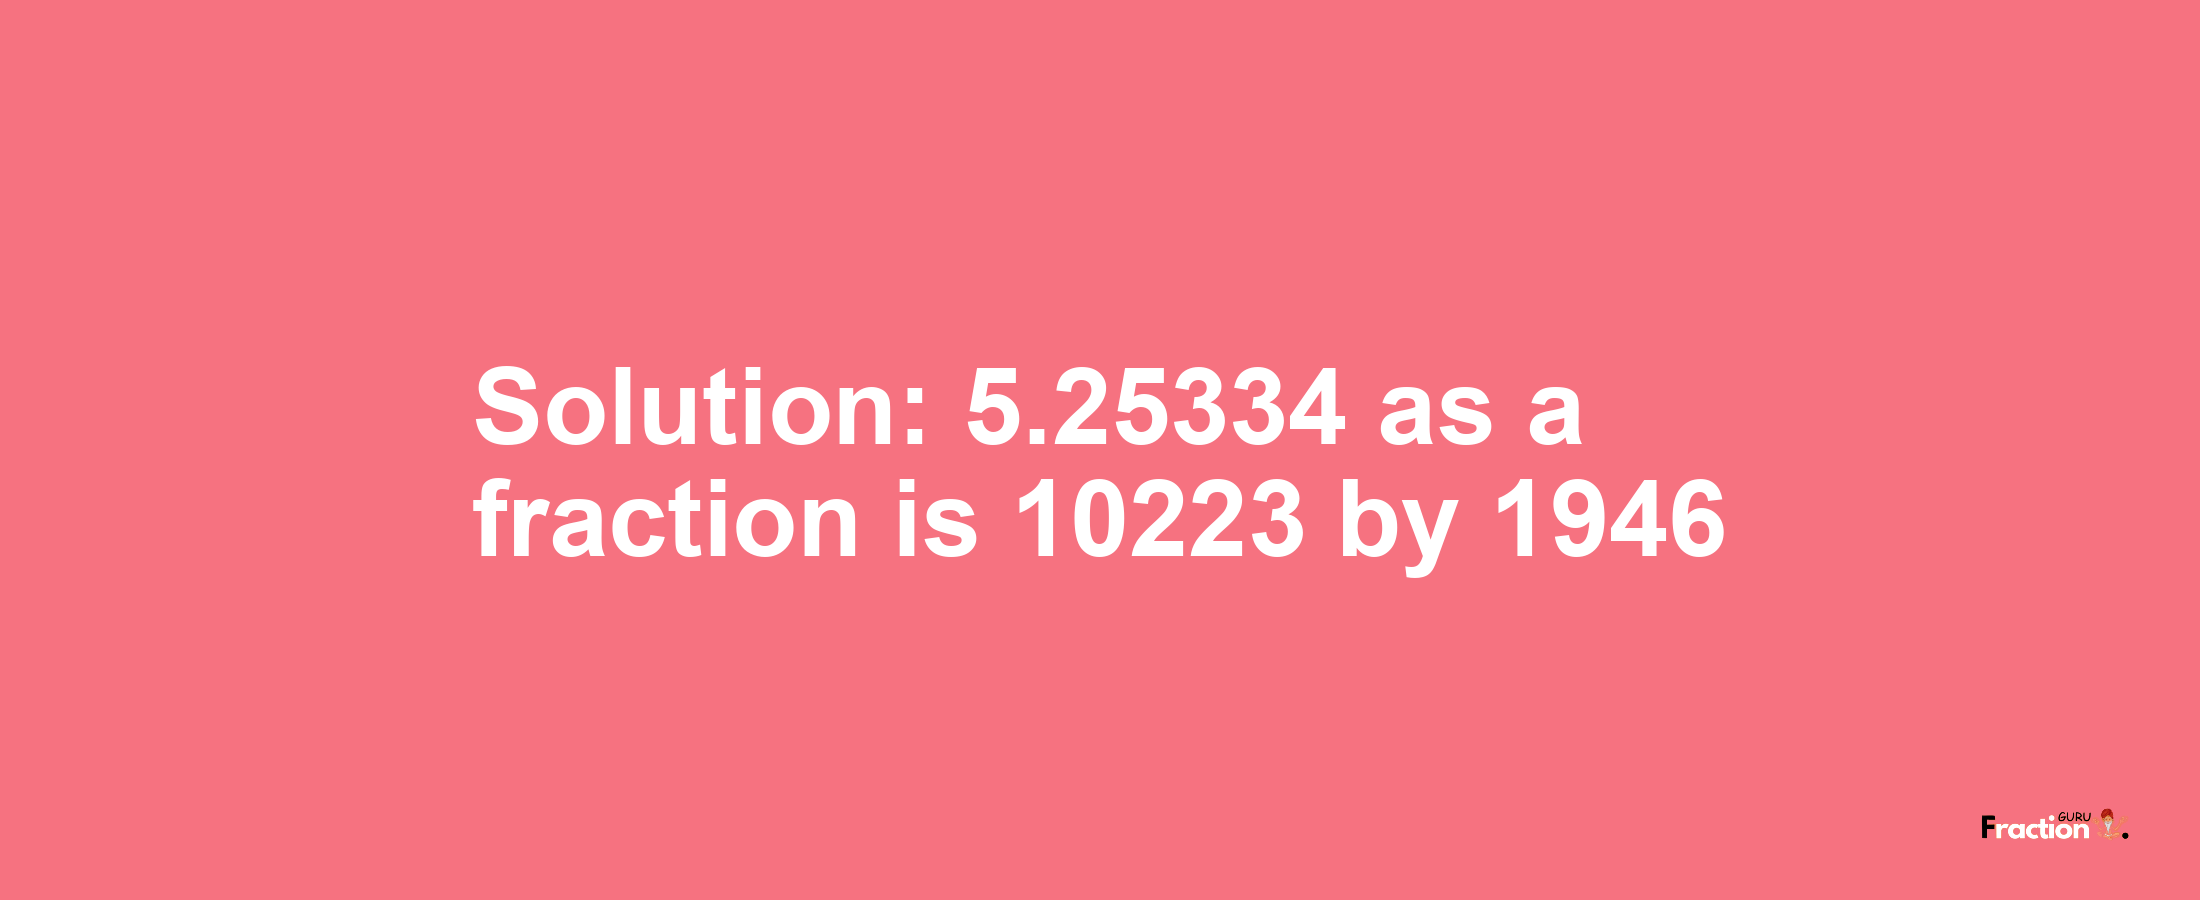 Solution:5.25334 as a fraction is 10223/1946